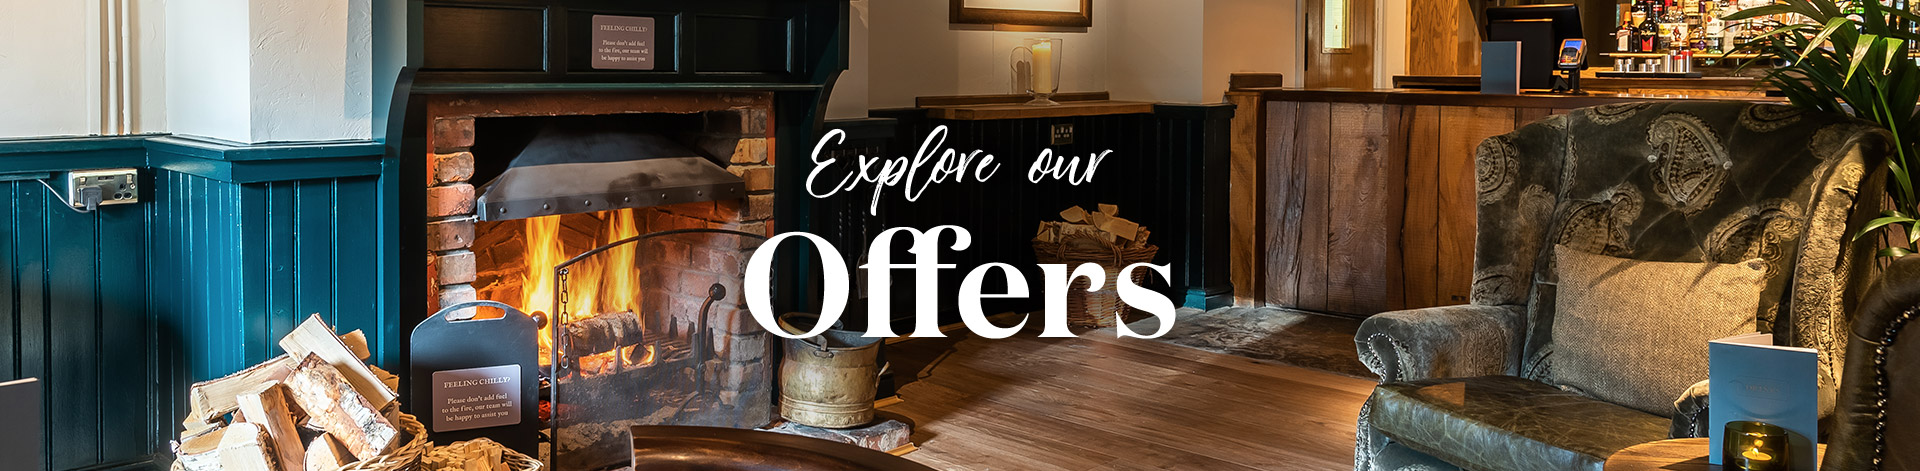 Our latest offers at The Titchfield Mill